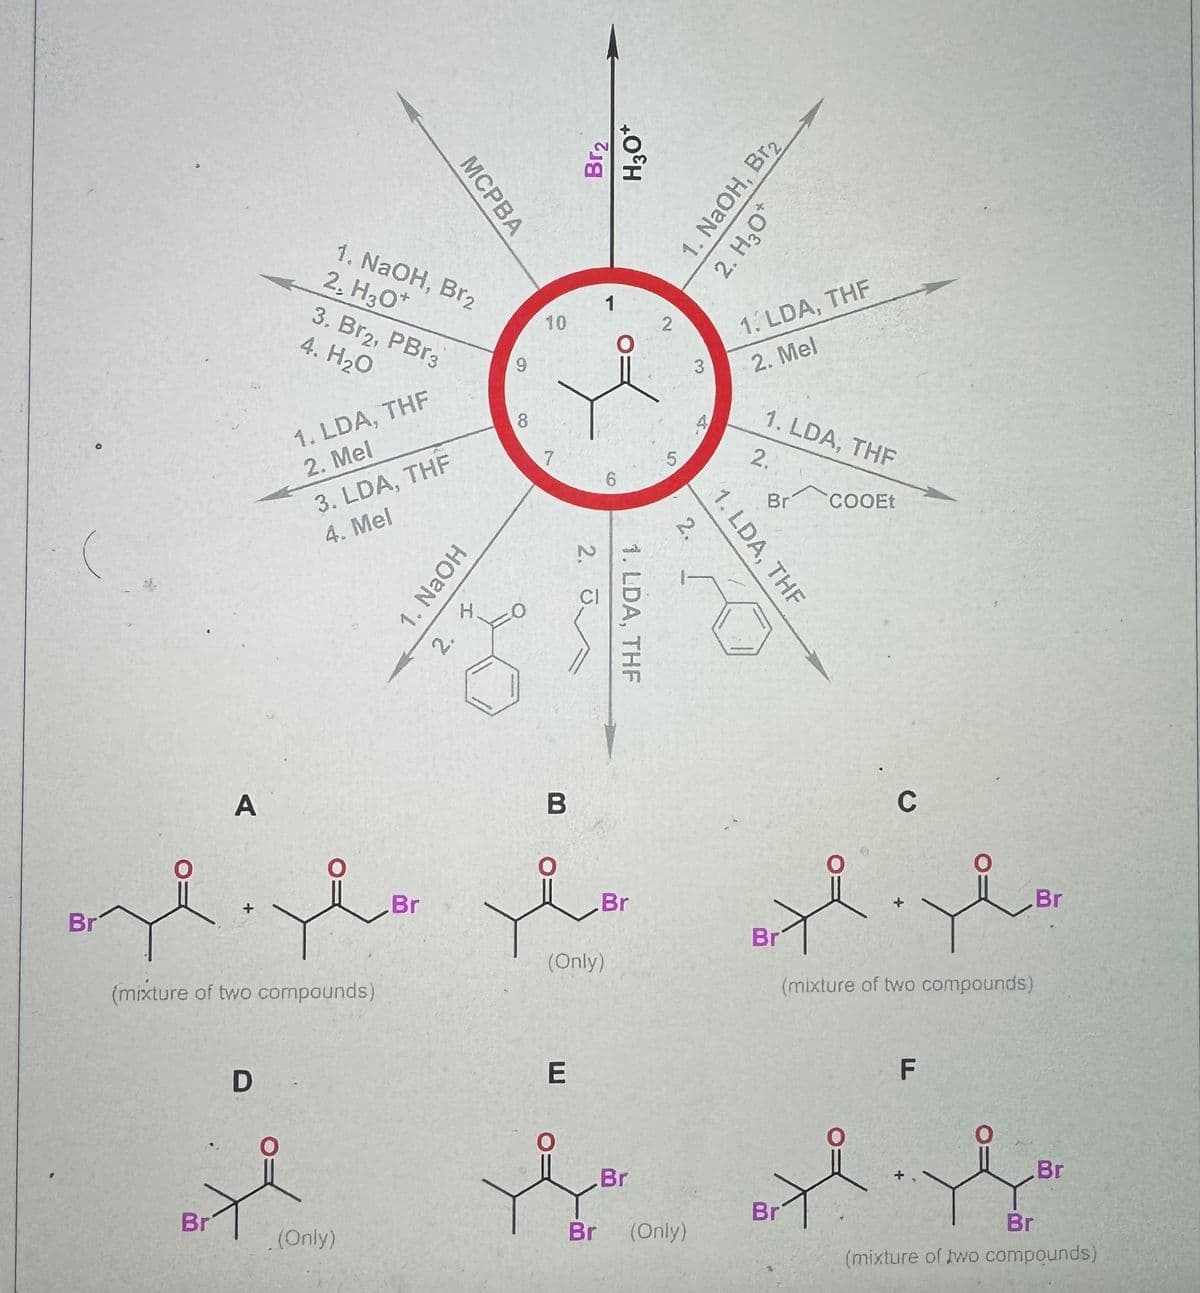 Br
A
MCPBA
1. NaOH, Br2
2. H3O+
3. Br2, PBг3
4. H₂O
1. LDA, THF
2. Mel
3. LDA, THF
4. Mel
1. NaOH
2. <
(mixture of two compounds)
D
6
Br2
H3O+
1. NaOH, Br,
2. H₂O*
1
10
2
3
8
7
60
1. LDA, THF
2.
B
5
1. LDA, THF
2. Mel
1. LDA, THF
2.
Br
COOEt
1. LDA, THF
2.
Br
Br
Br
(Only)
E
C
0
(mixture of two compounds)
Br
Br
Br
Br
(Only)
(Only)
F
Br
Br
Br
(mixture of two compounds)